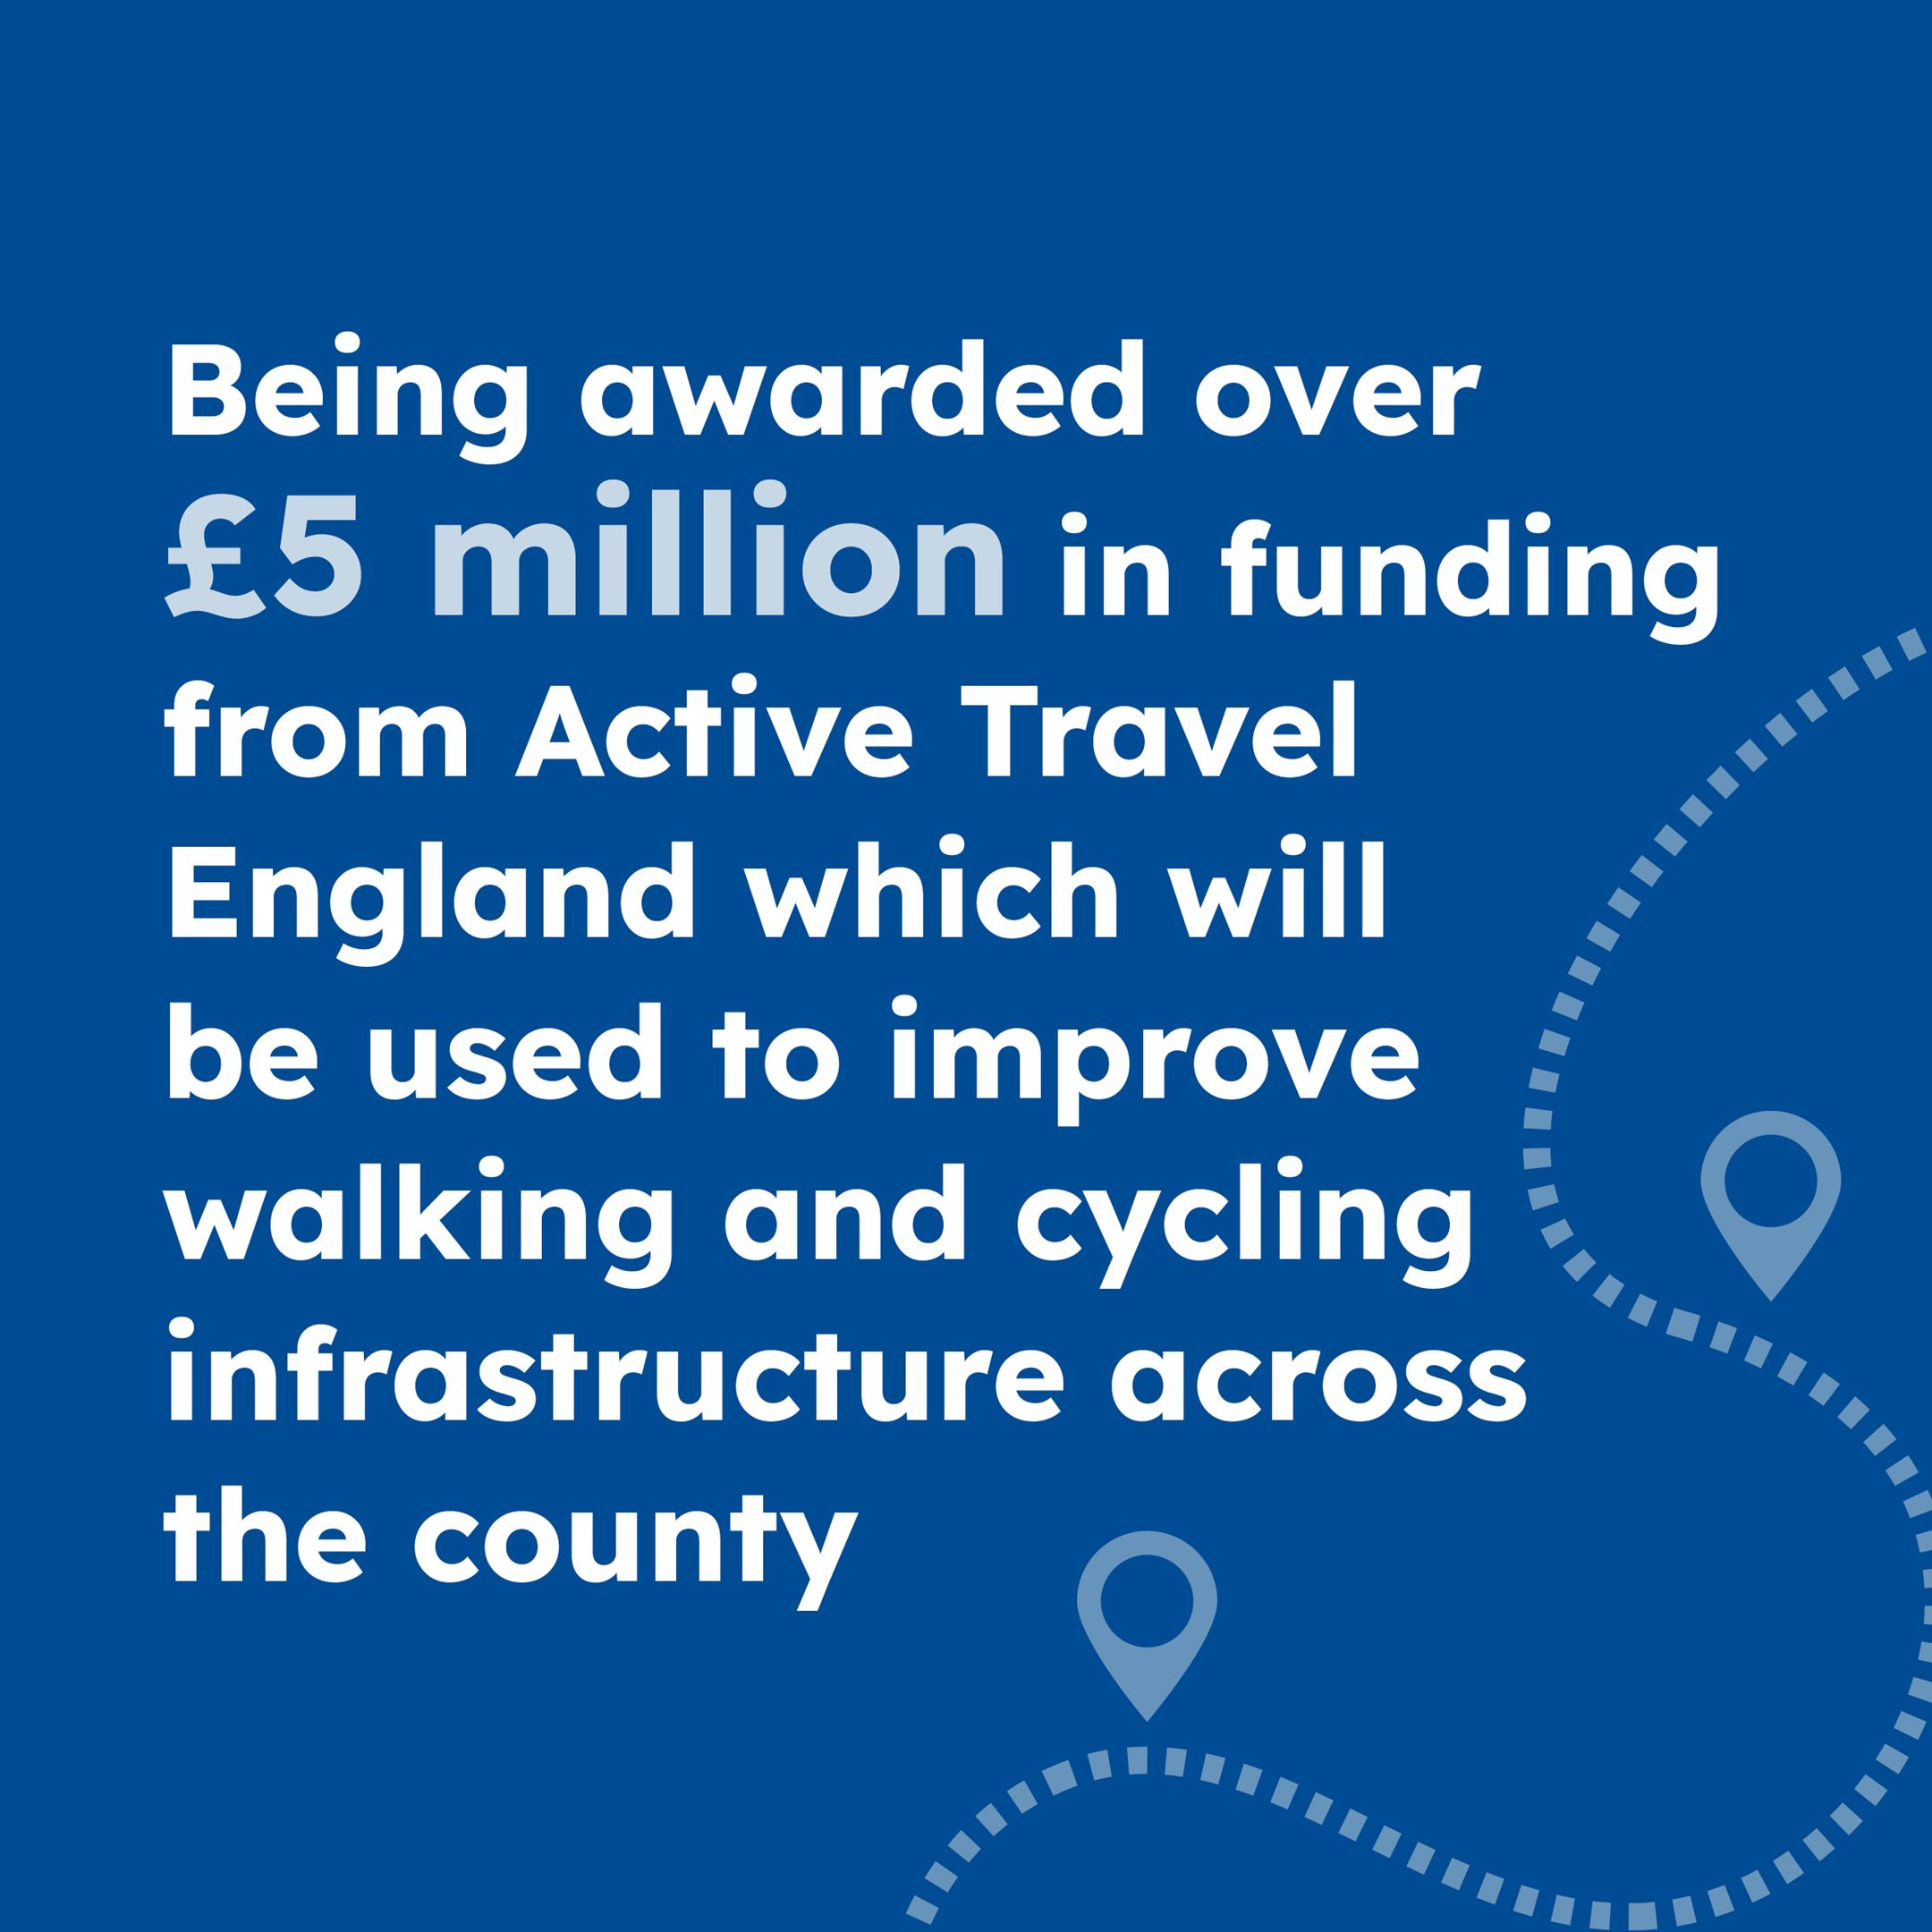 Being awarded over £5 million in funding from Active Travel England which will be used to improve walking and cycling infrastructure across the county